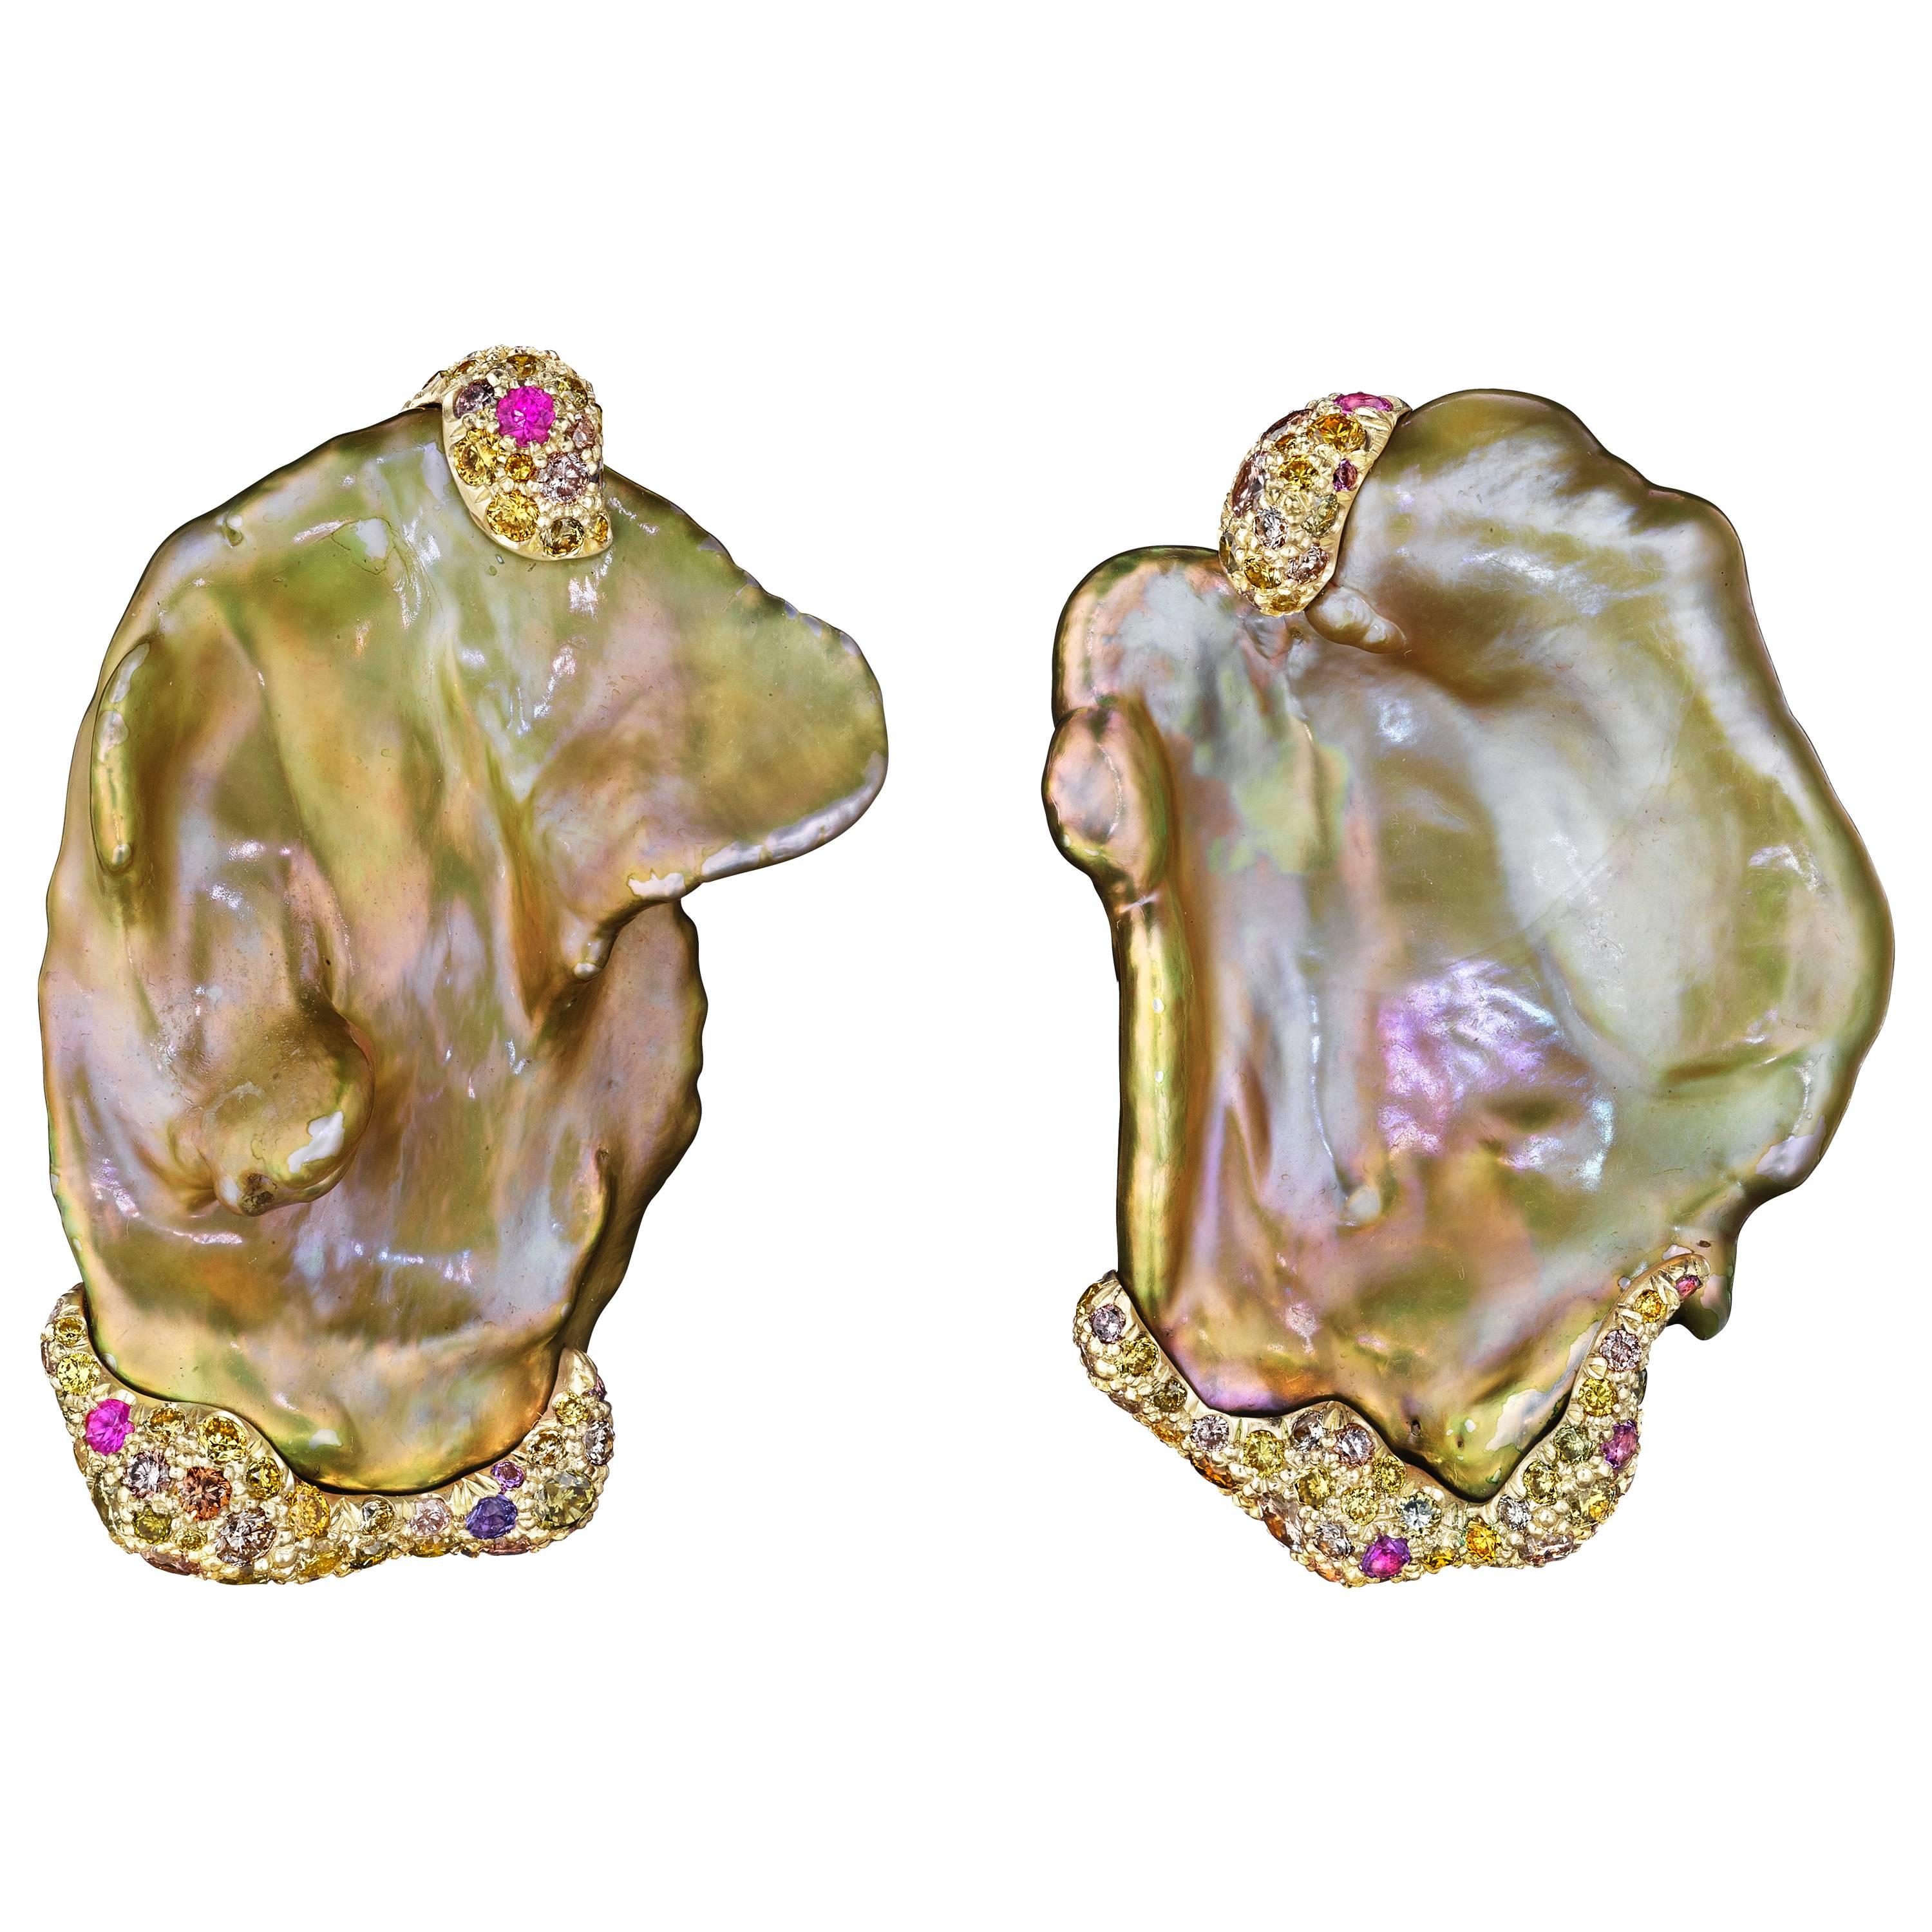 These eye-catching earrings feature a pair of Chinese freshwater pearls accentuated by multicolored diamonds and sapphires set in 18K yellow gold.

Internationally award winning designer Naomi Sarna creates gem carvings and jewels of unusual beauty.